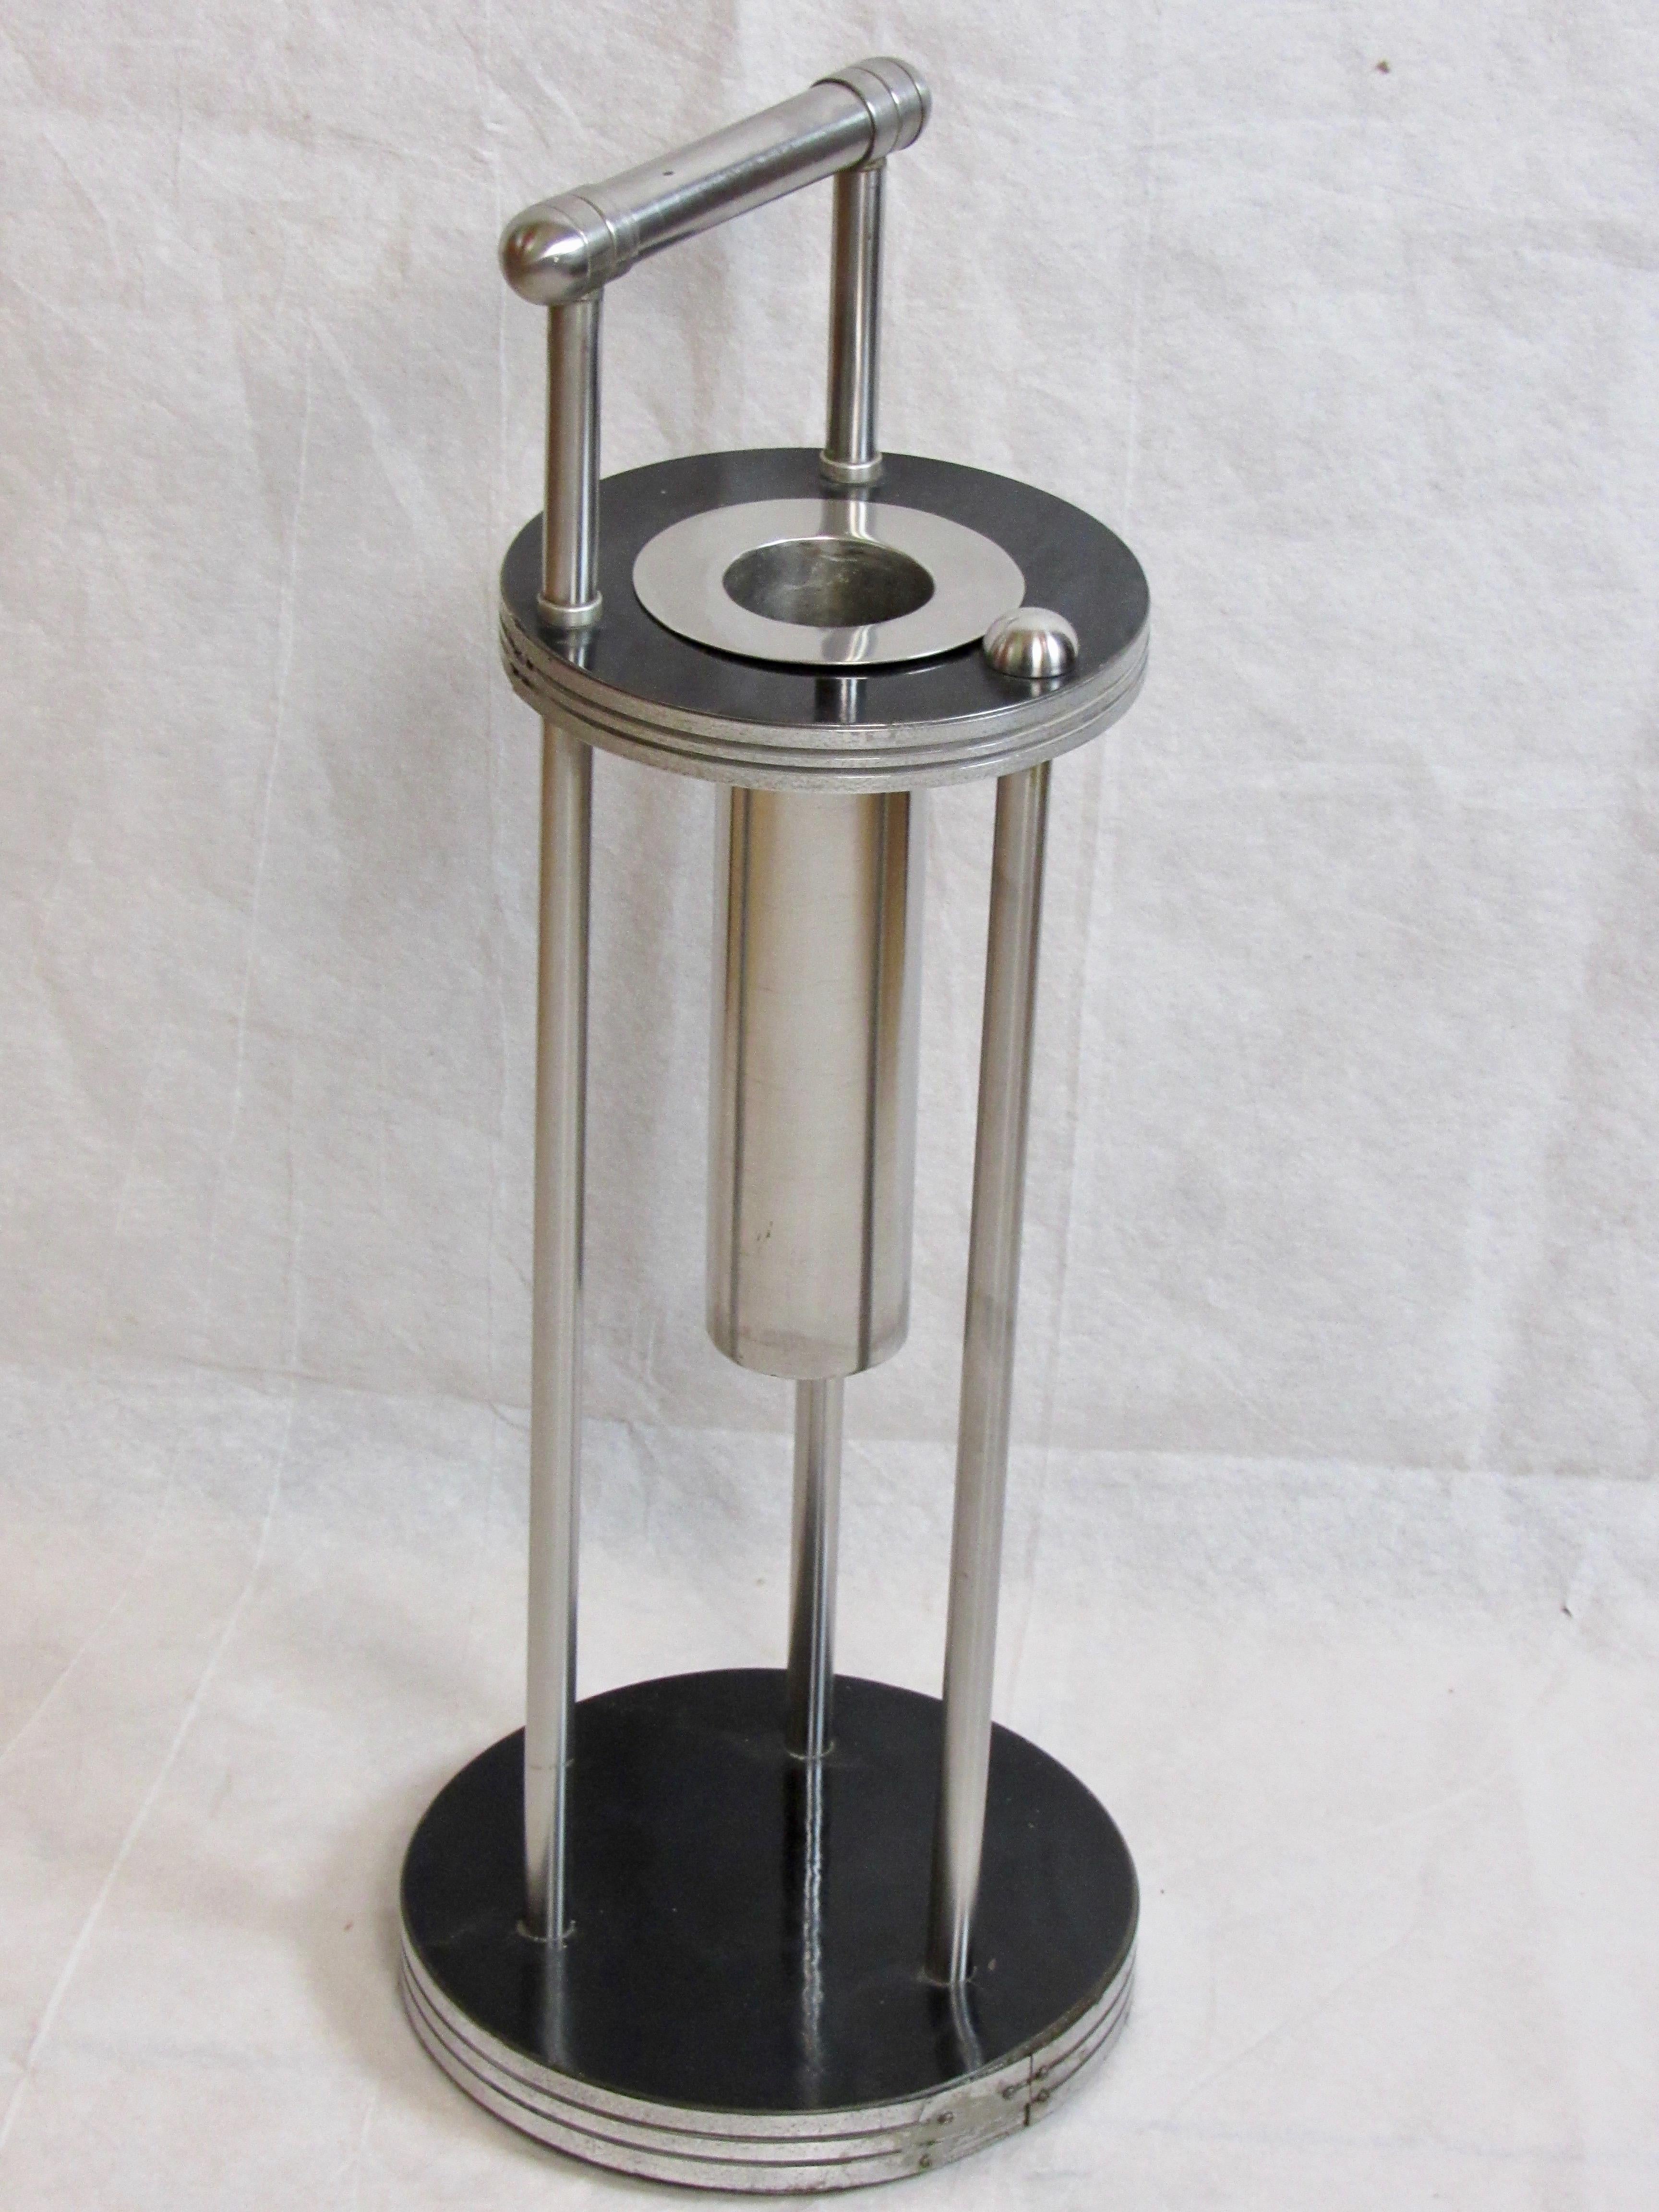 A Warren McArthur smoking stand framed in stainless steel from the early mid 1930's with A Rome, New York 